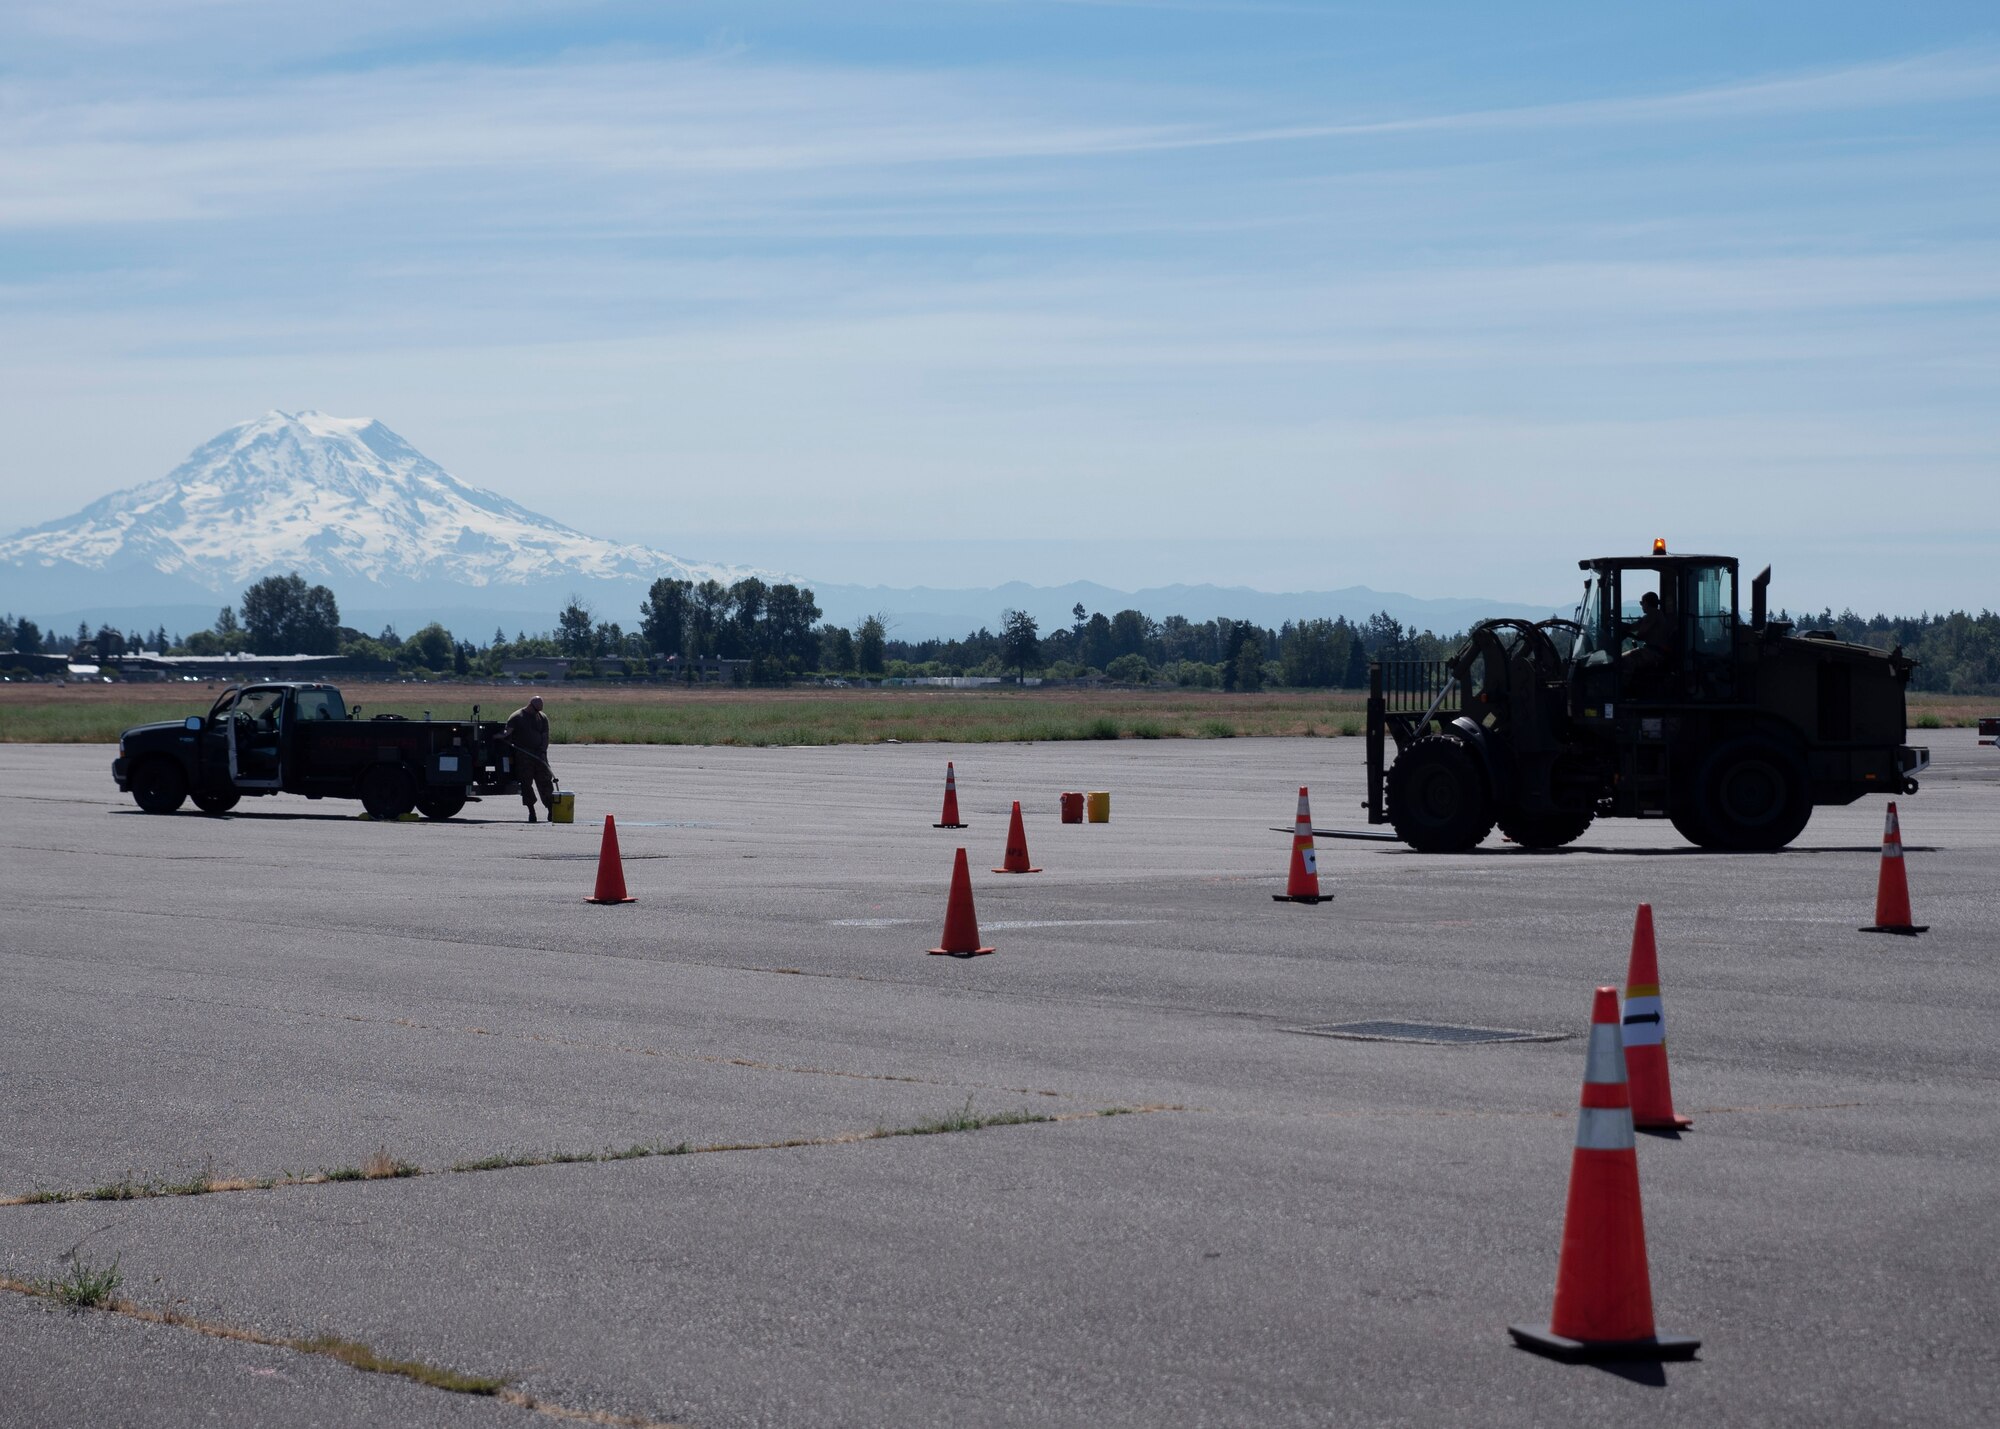 An Airman with the 62nd Aerial Port Squadron operates a forklift during a skills course for the Eagle Port Rodeo Team tryouts at Joint Base Lewis-McChord, Washington, June 24, 2021. The participants took part in five events: a pallet build-up competition, a 10K forklift skills course, a simulated aircraft upload, a combat fitness challenge and a knowledge test based on their Air Force specialty codes. (U.S. Air Force photo by Senior Airman Zoe Thacker)